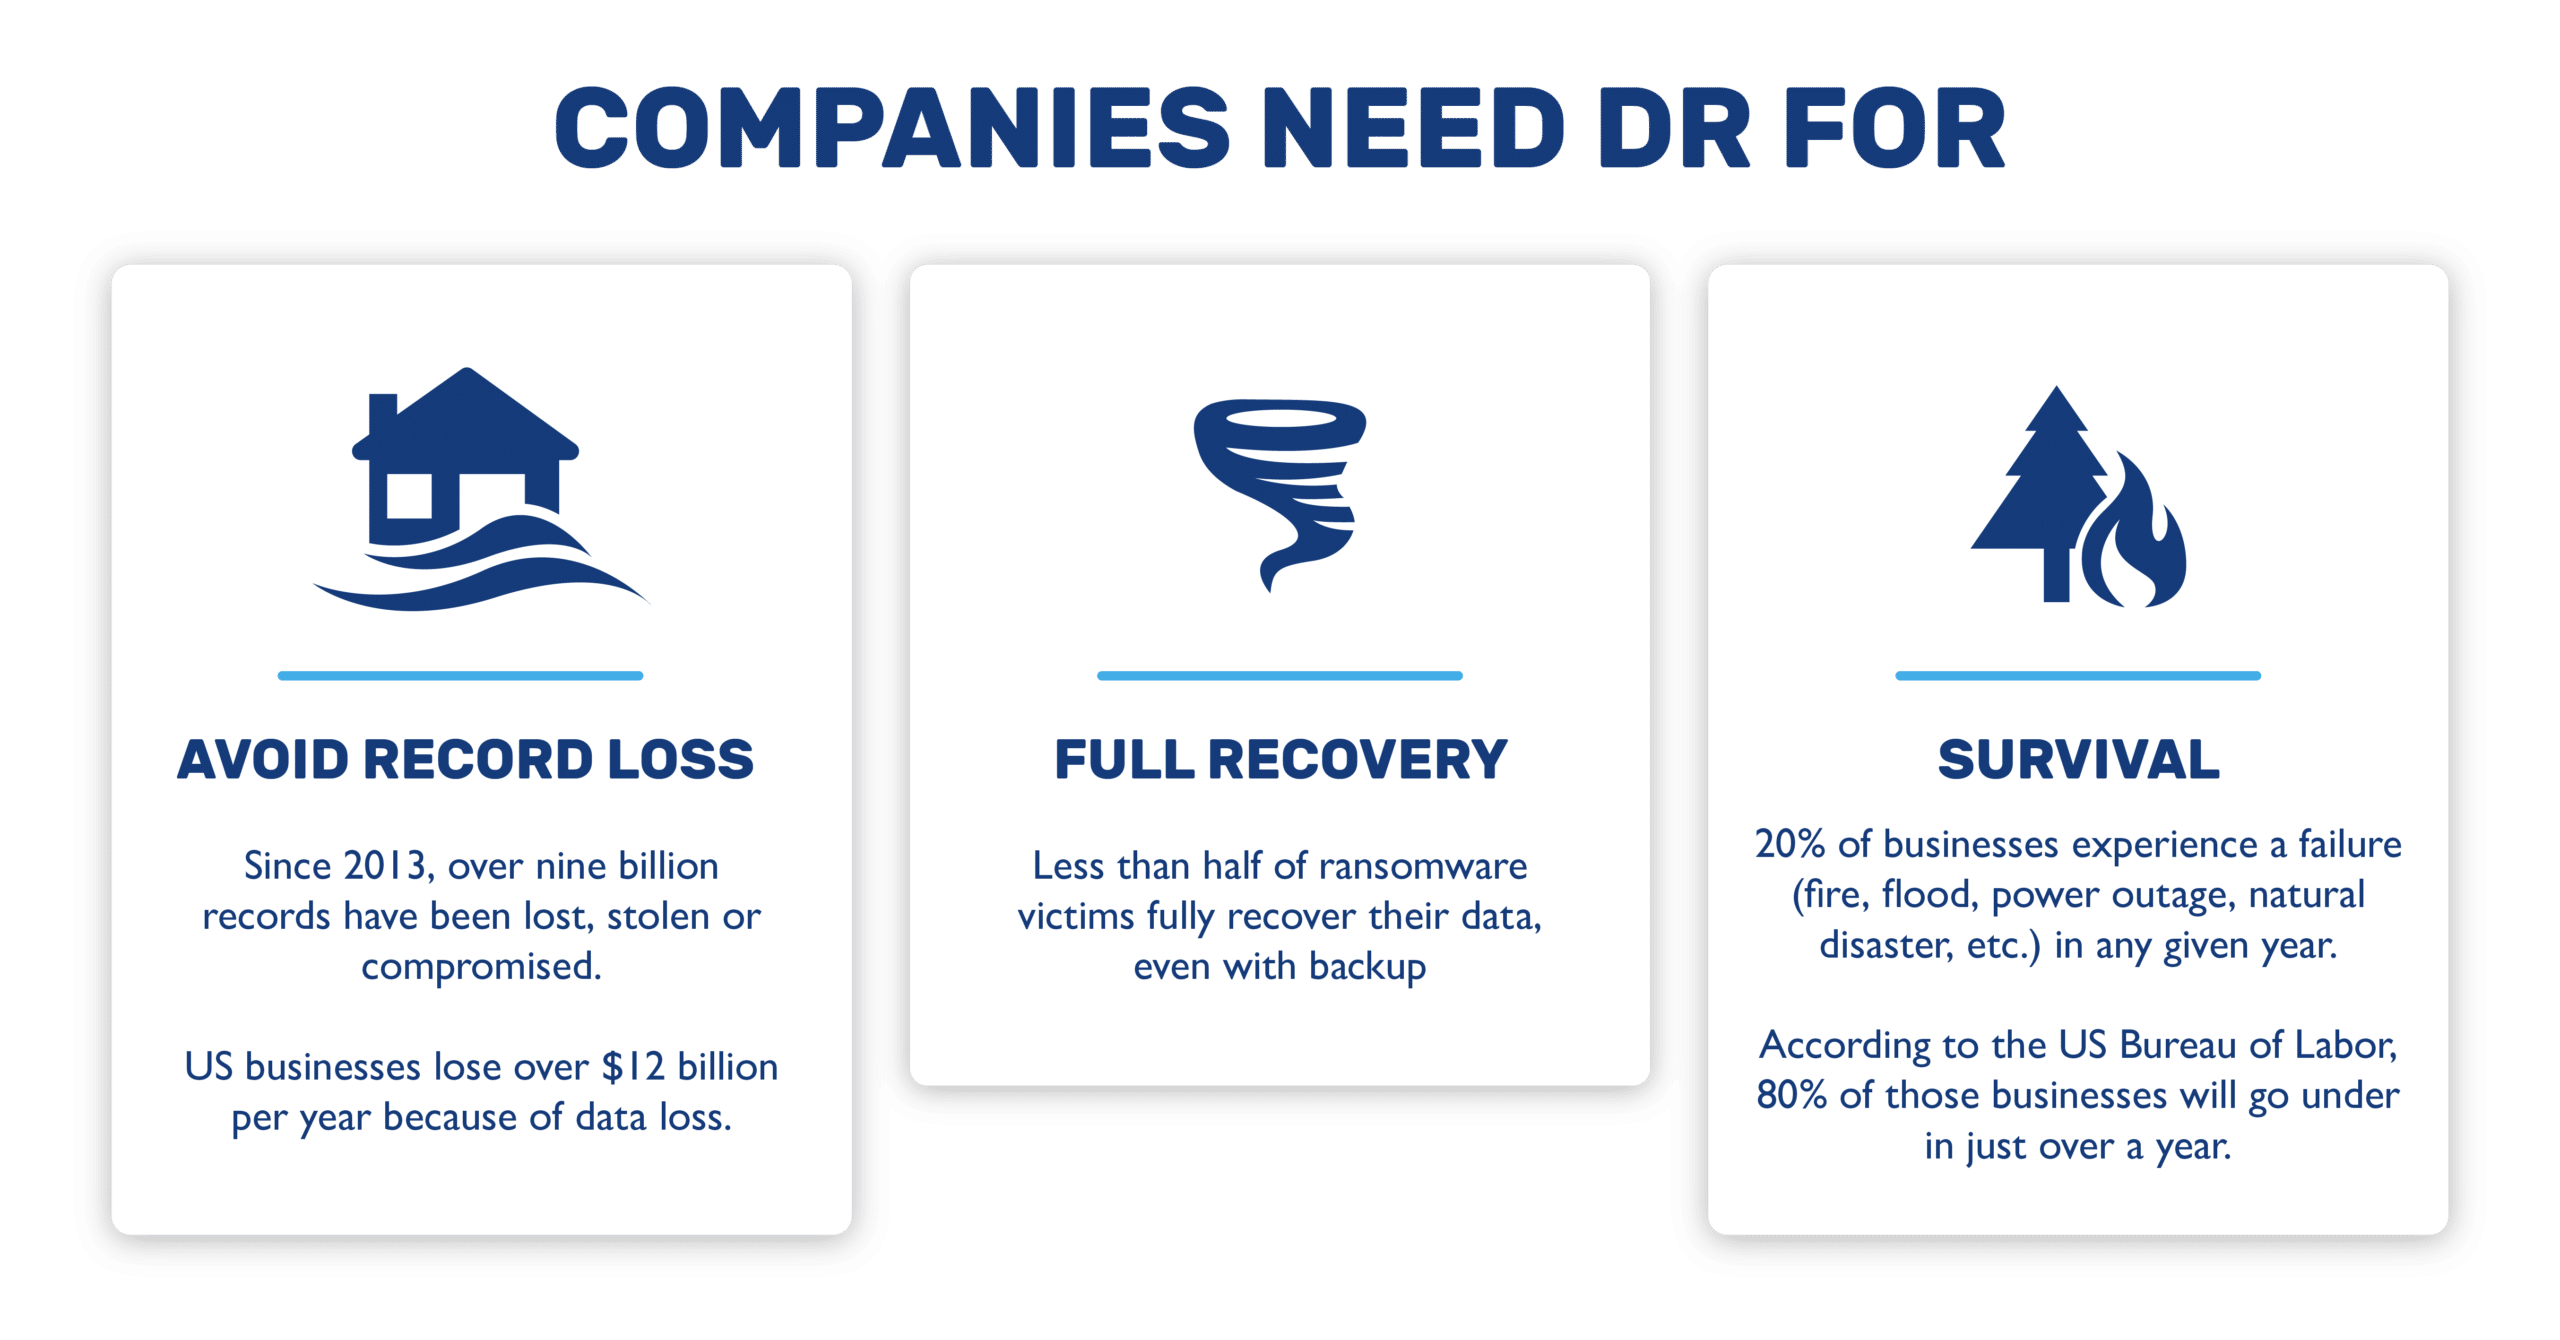 Companies need DR for avoiding record loss, making a full recovery, and business survival